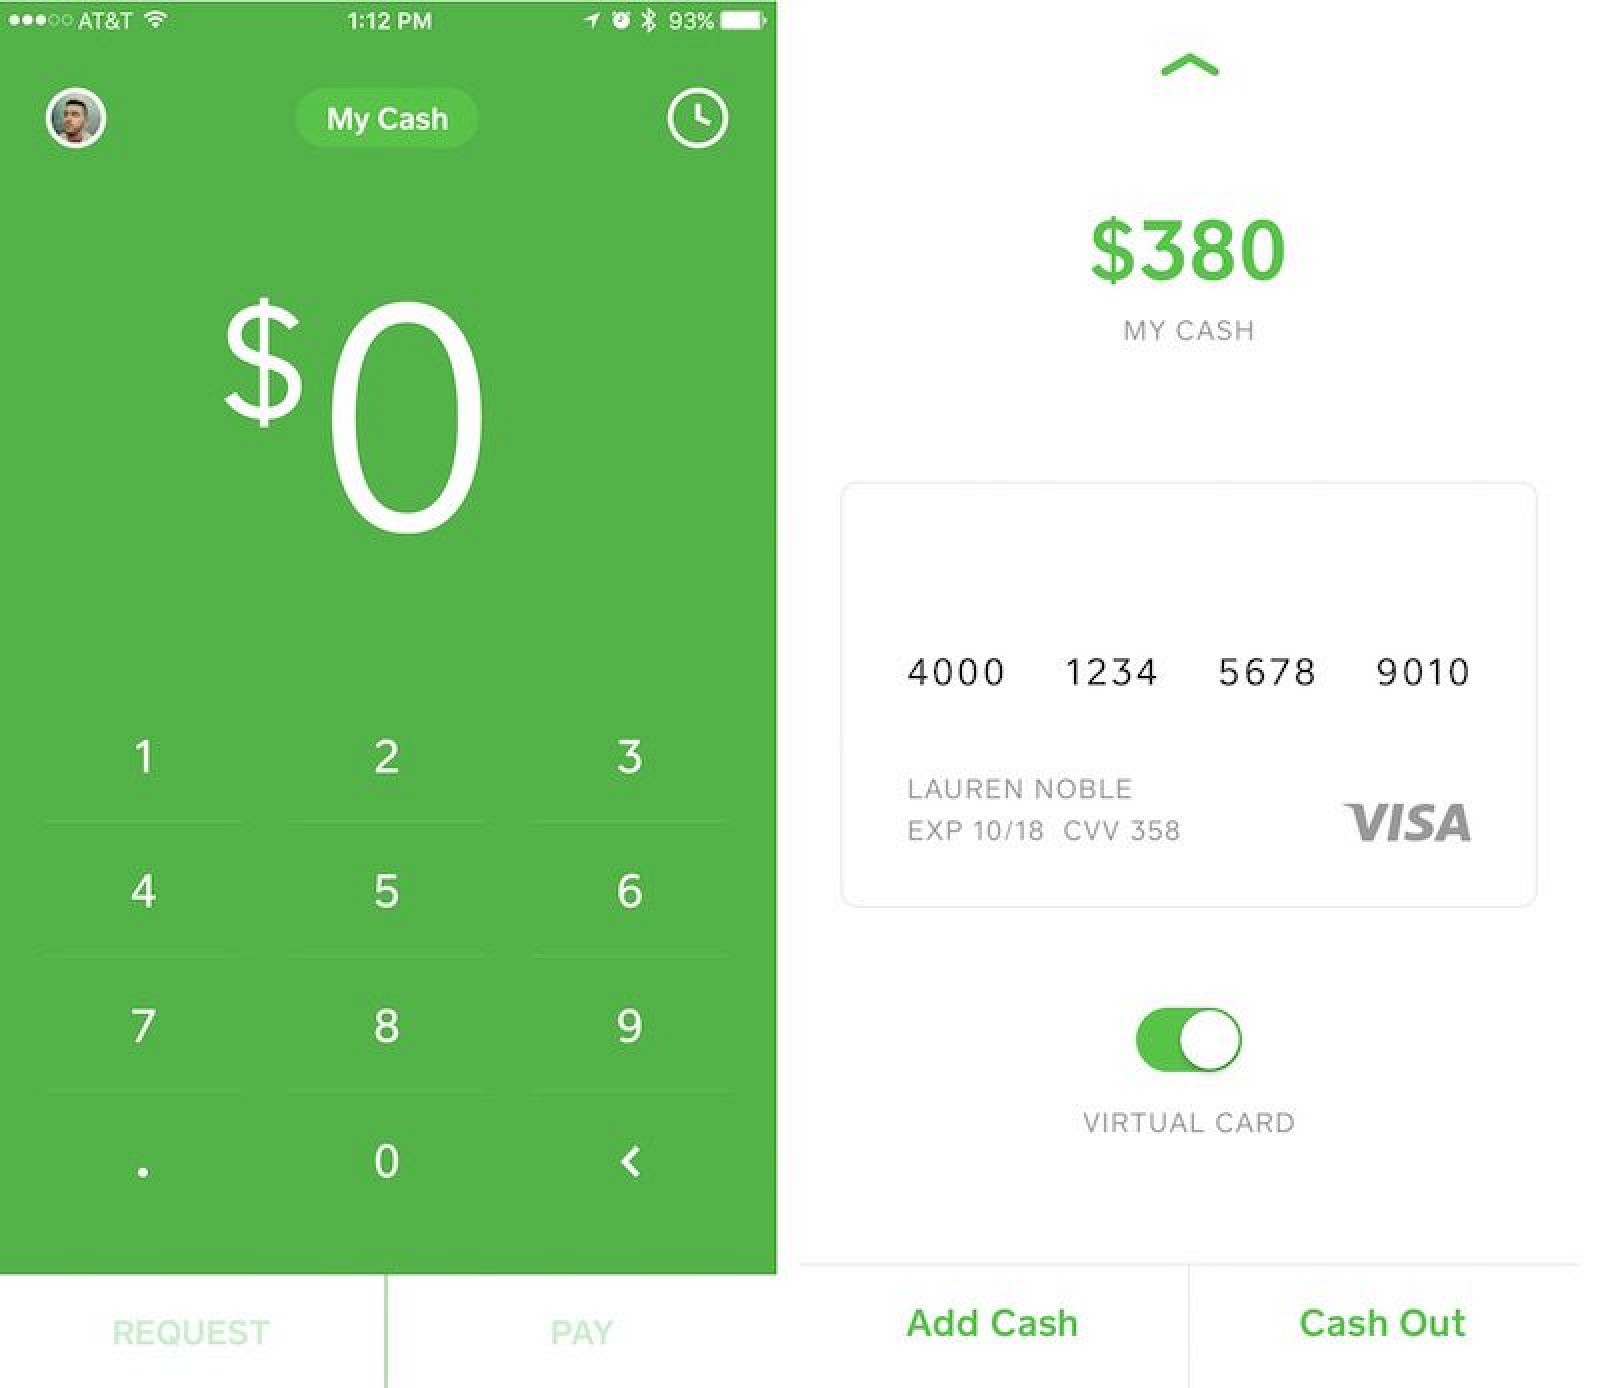 39 Top Images Fake Cash App Balance Screenshot / PayPal refreshed with